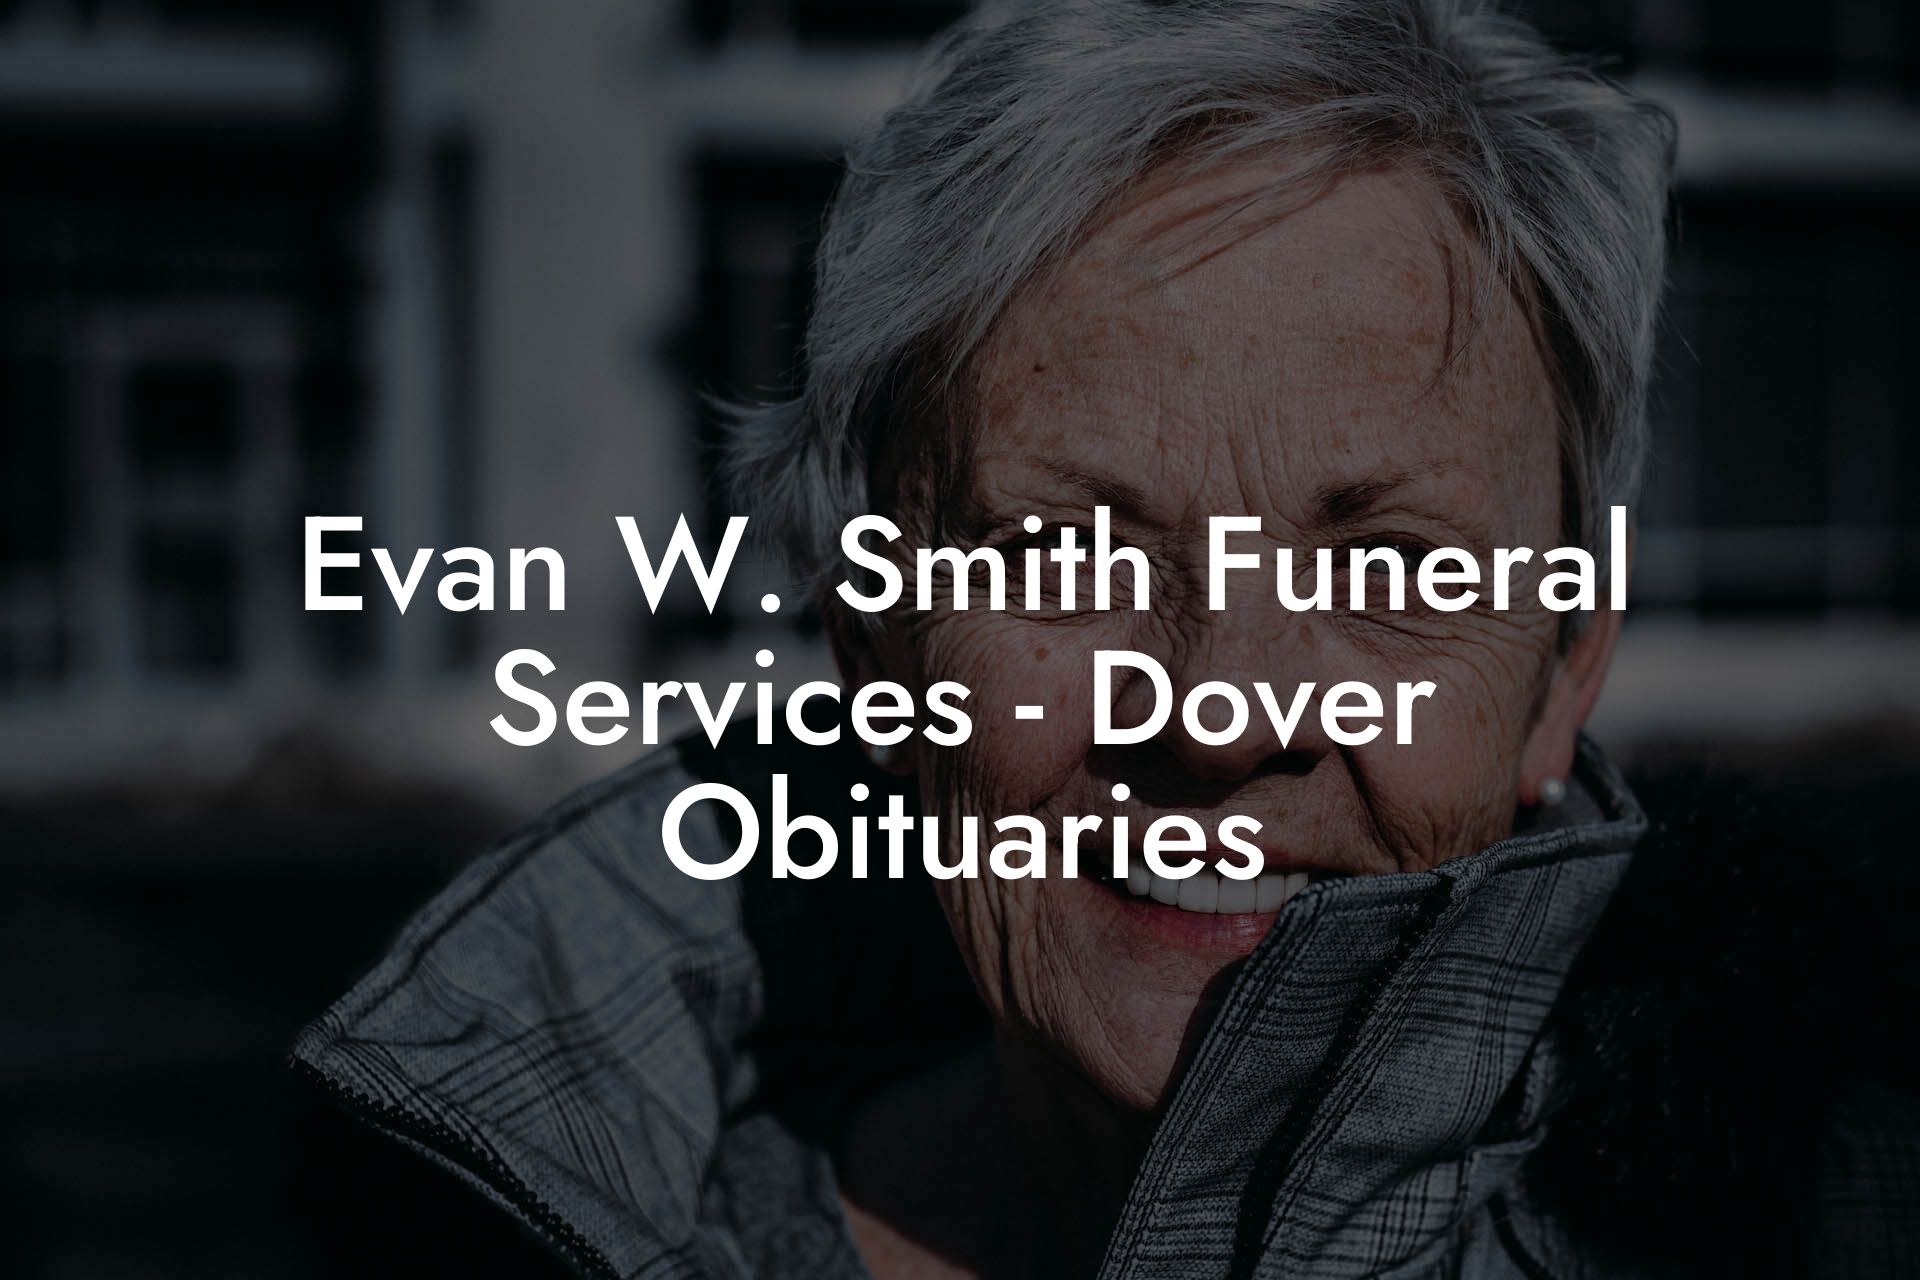 Evan W. Smith Funeral Services - Dover Obituaries